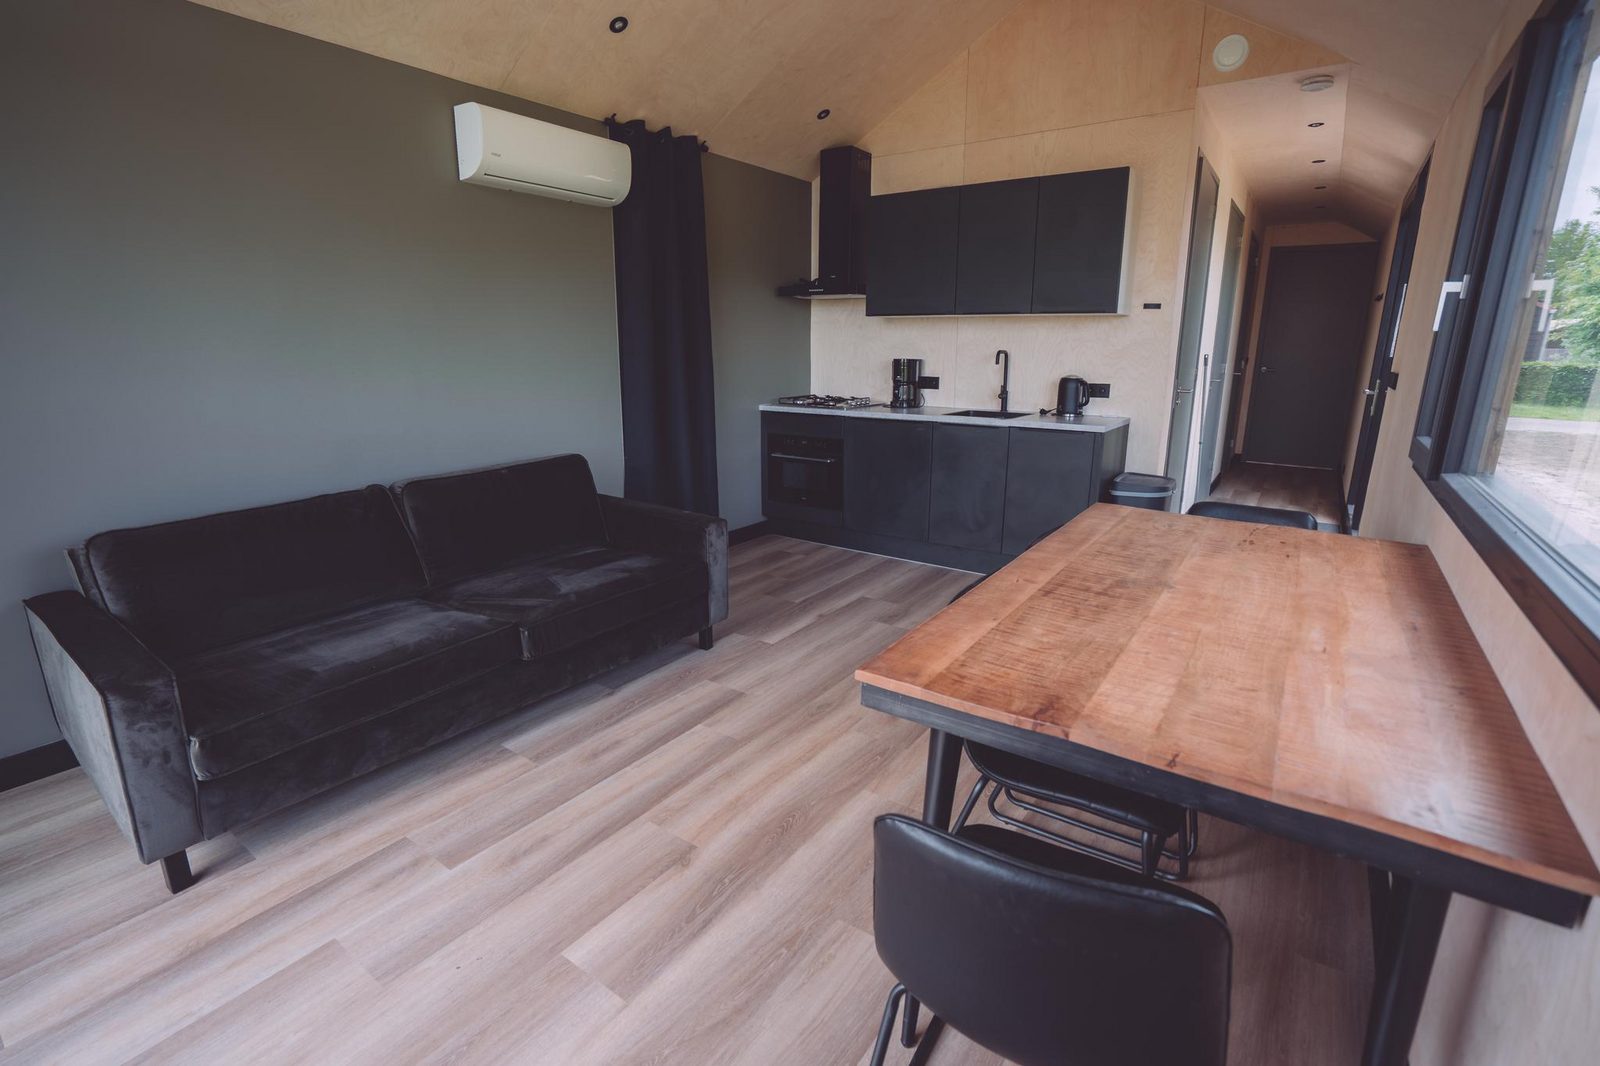 Groupaccommodation 'de Blokhut' + 4 4-personTiny Houses (16 people)